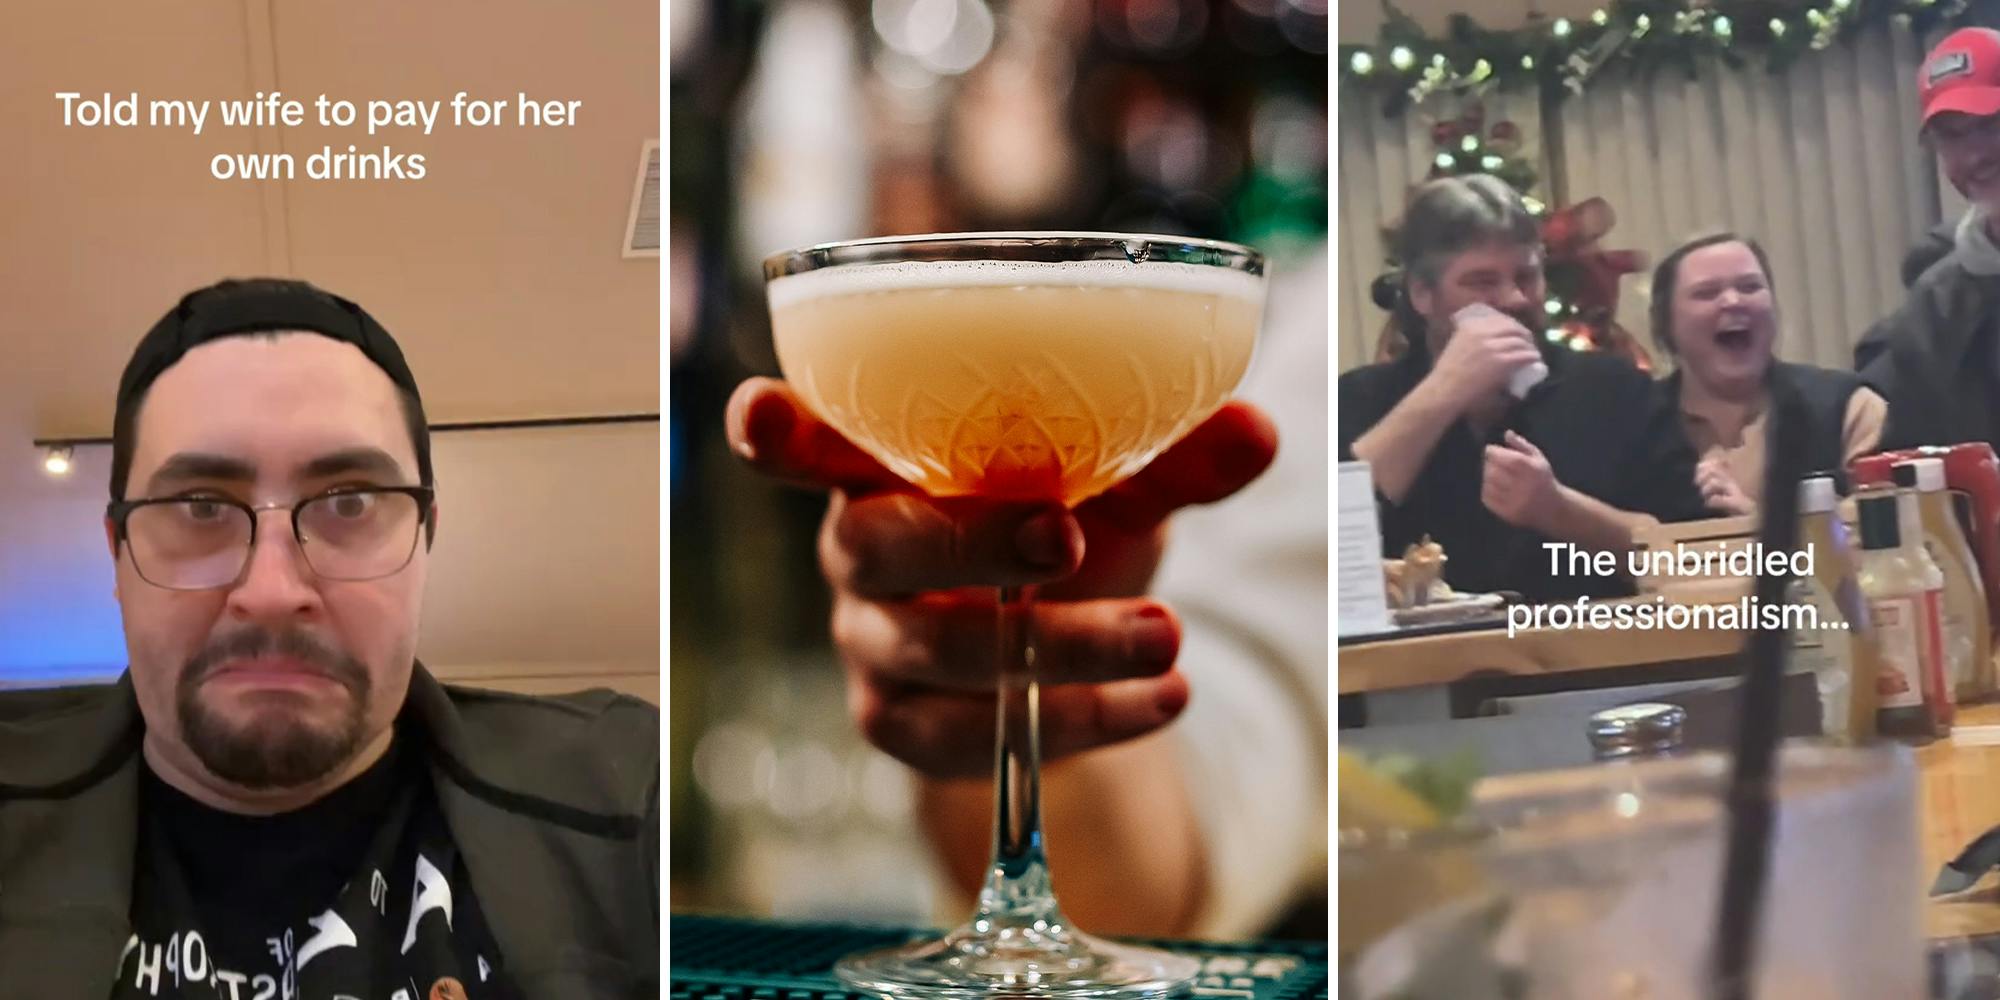 A man asks his wife to pay for her drinks herself.  It’s counterproductive